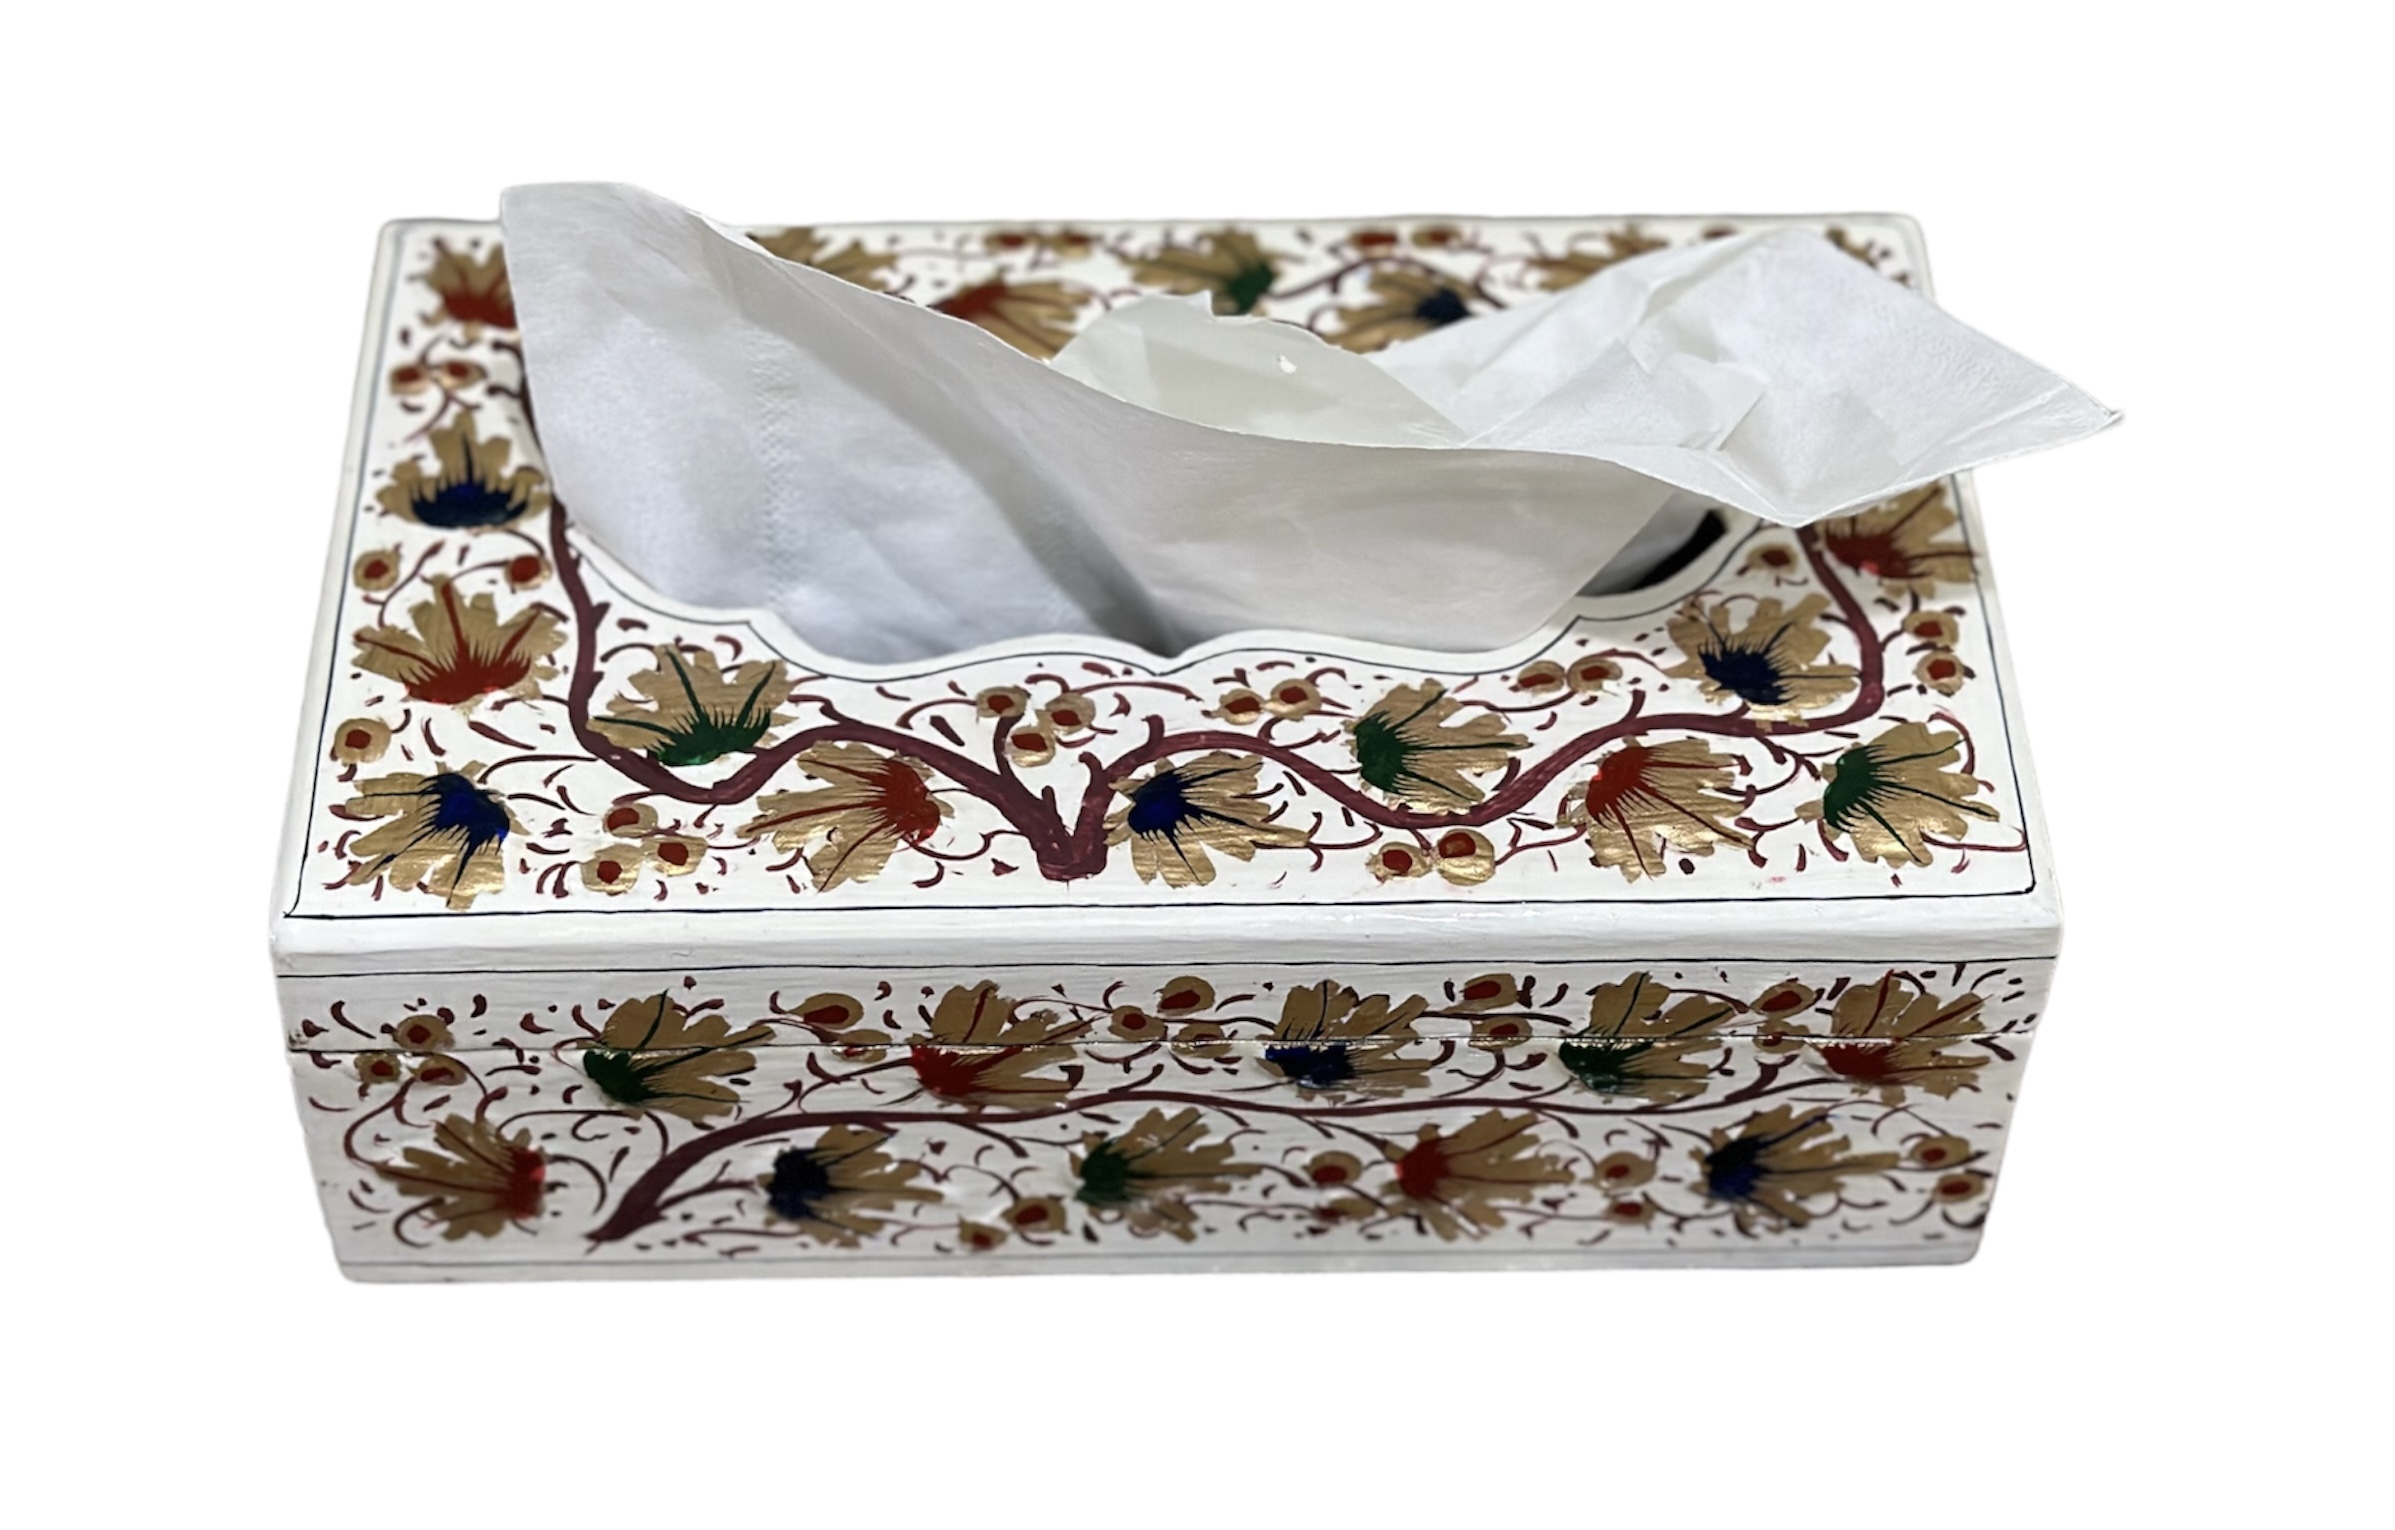 Paper mache tissue box, hand painted tissue holder, colorful tissue box for dinning